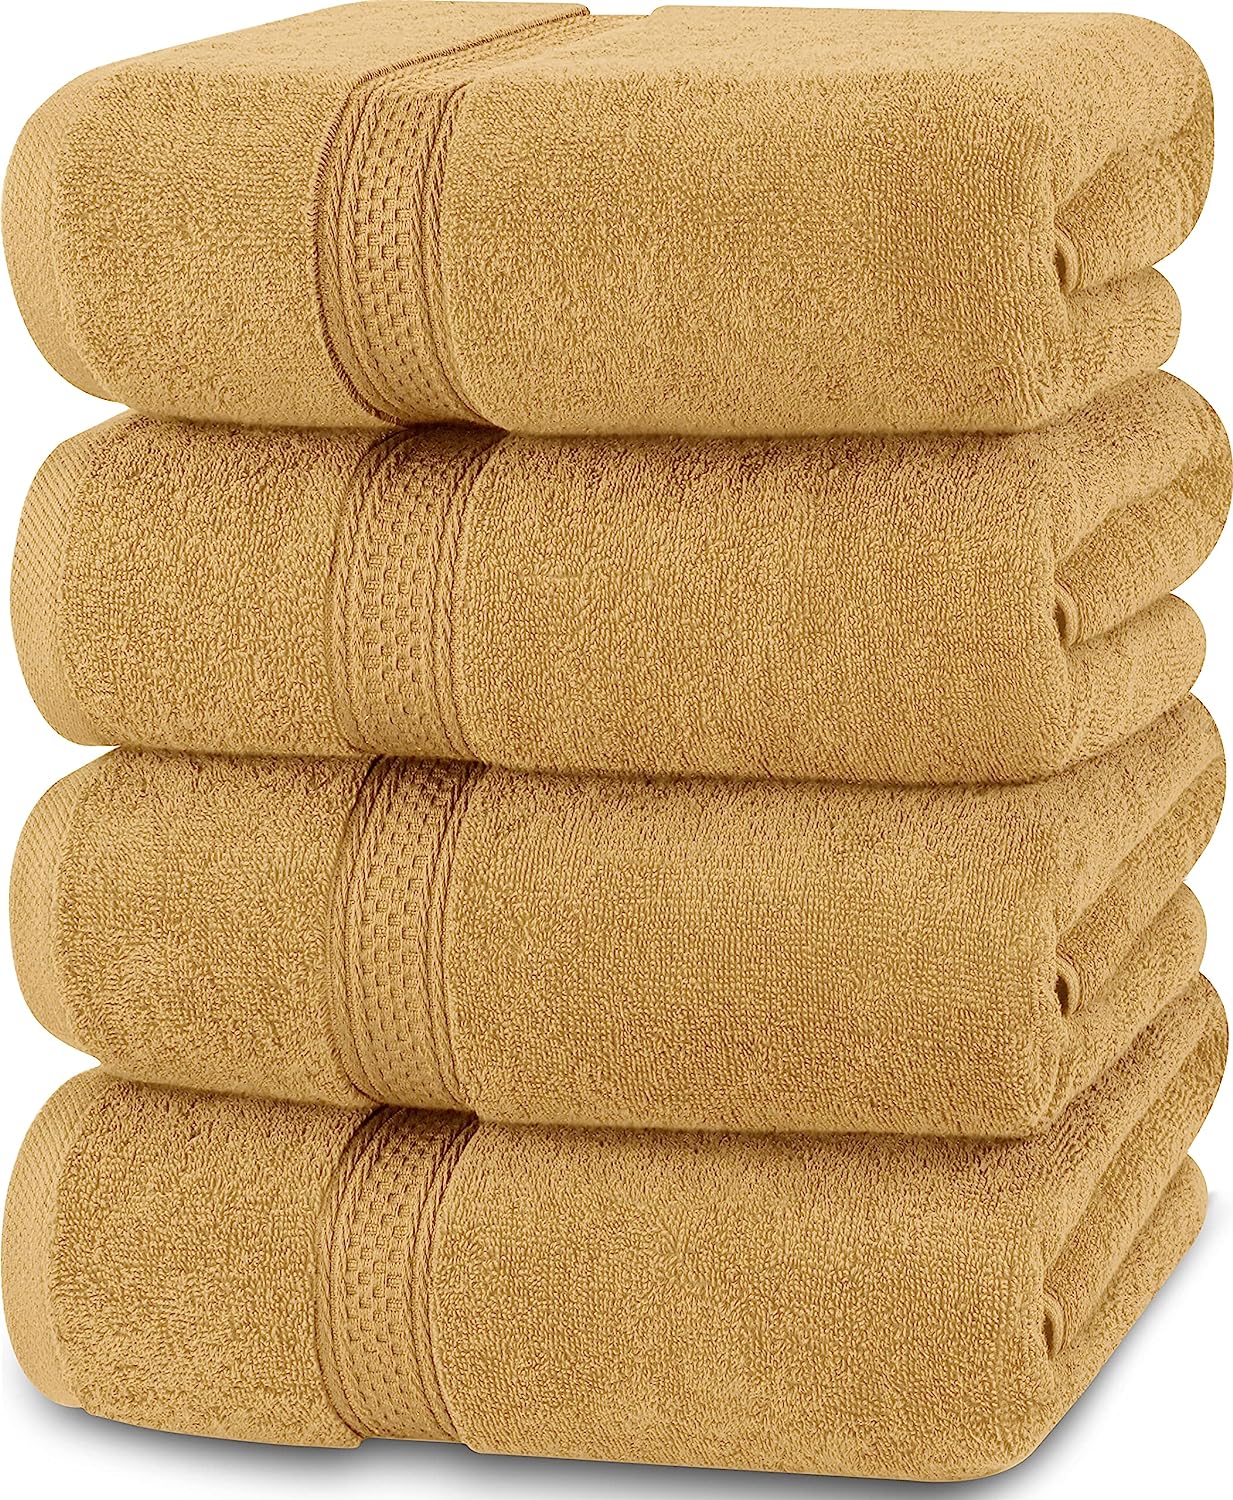 Utopia Towels - Luxurious Jumbo Bath Sheet 2 Piece - 600 GSM 100% Ring Spun Cotton Highly Absorbent and Quick Dry Extra Large Bath Towel - Super